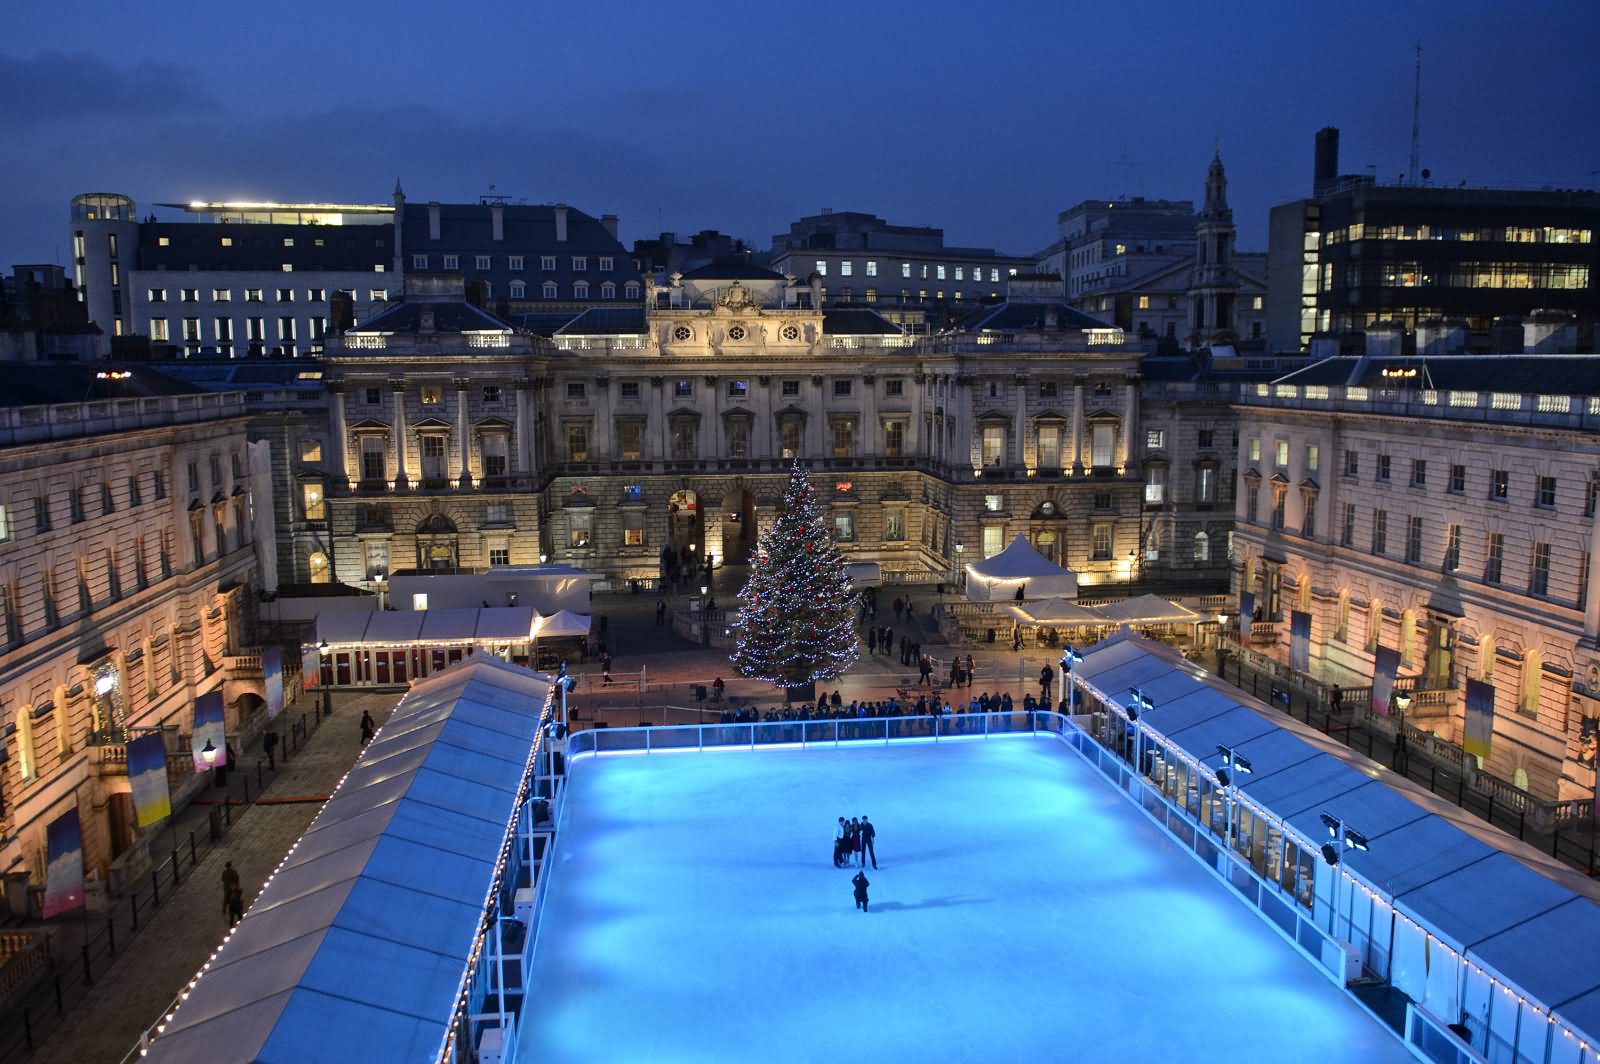 20 Amazing Night View Pictures Of Somerset House, London.